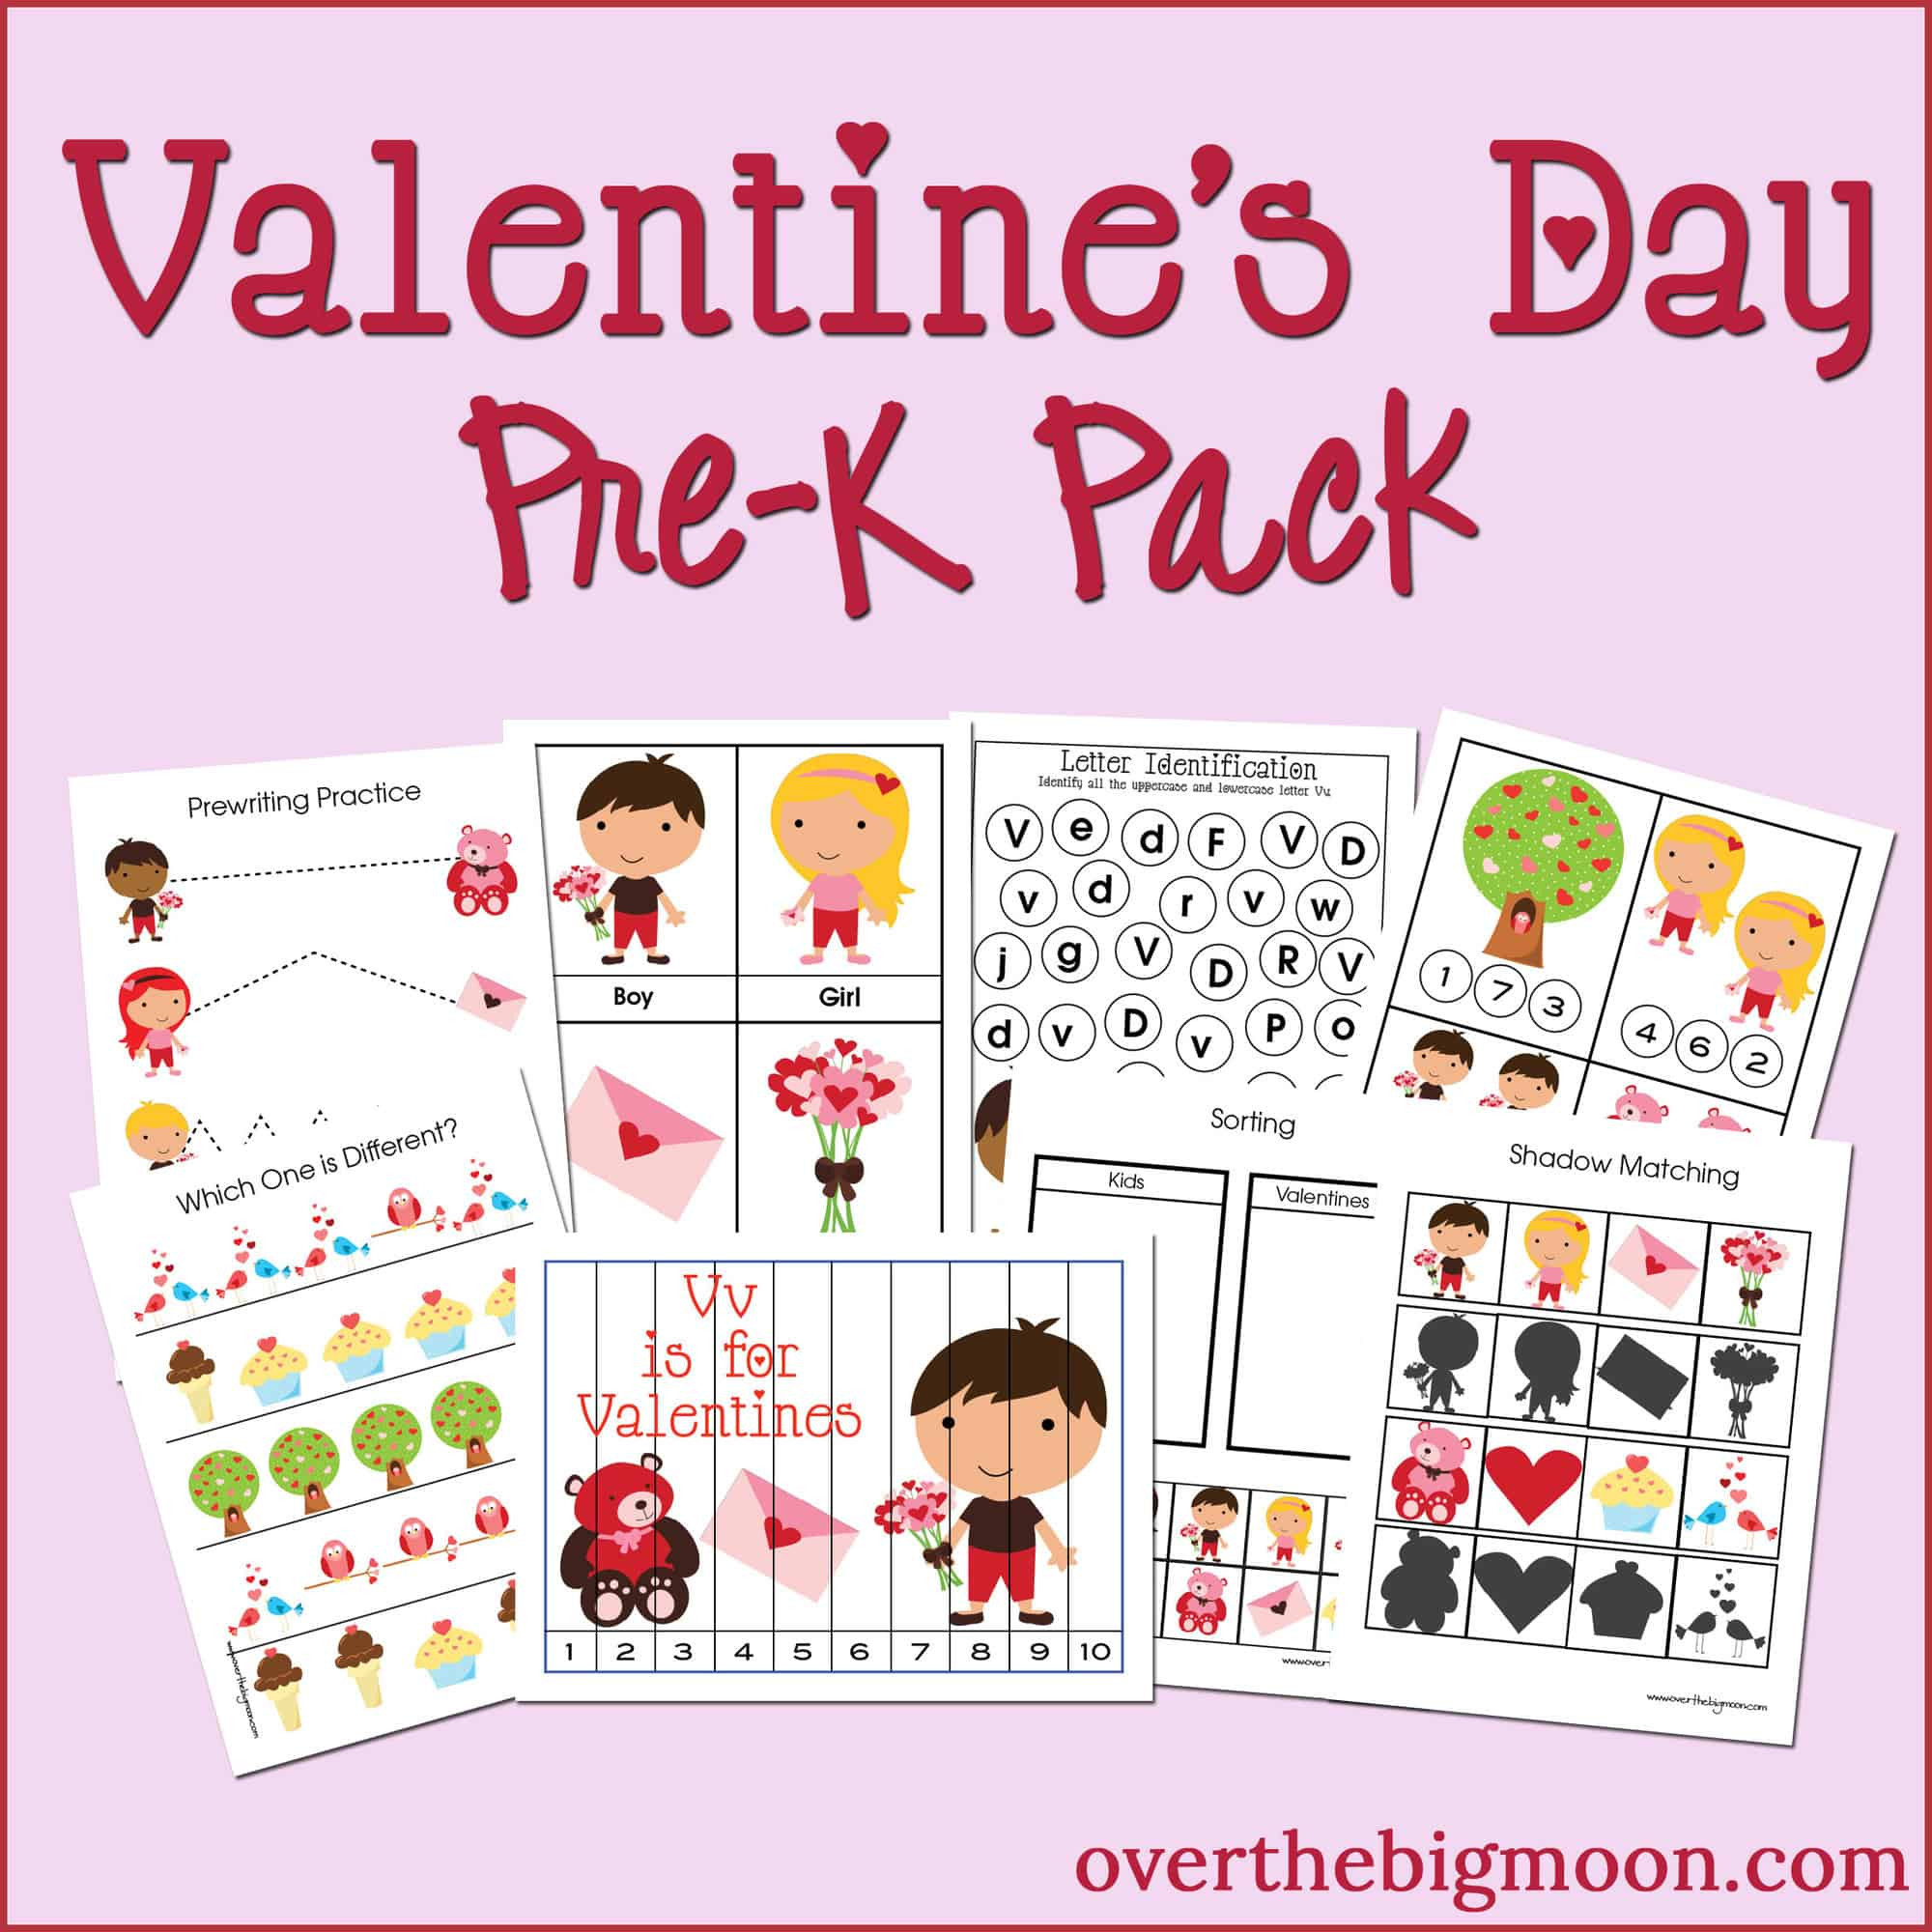 Valentines Day Activities
 Valentine s Day Pre K Pack Over the Big Moon